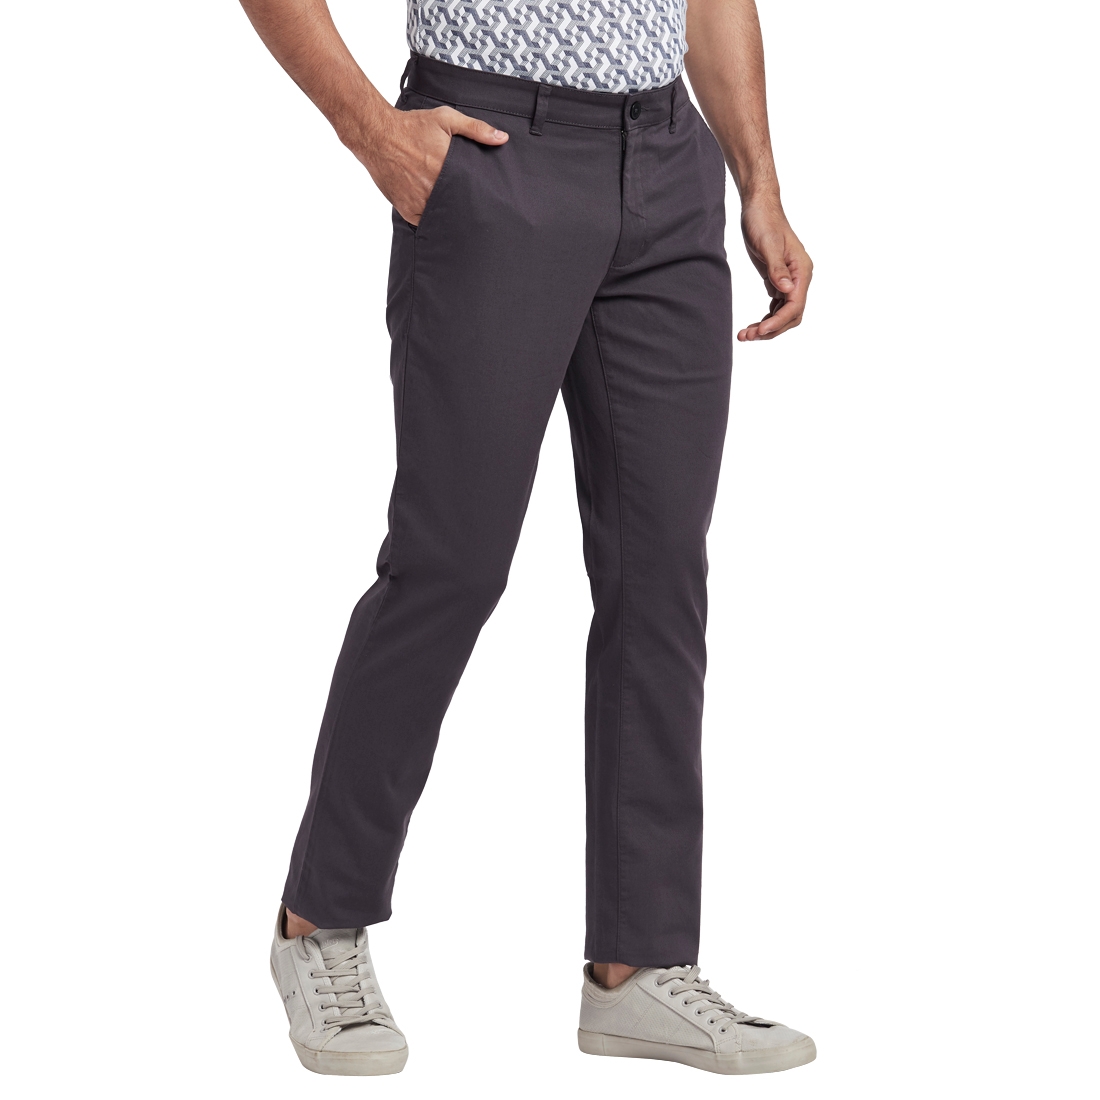 ColorPlus Grey Trousers